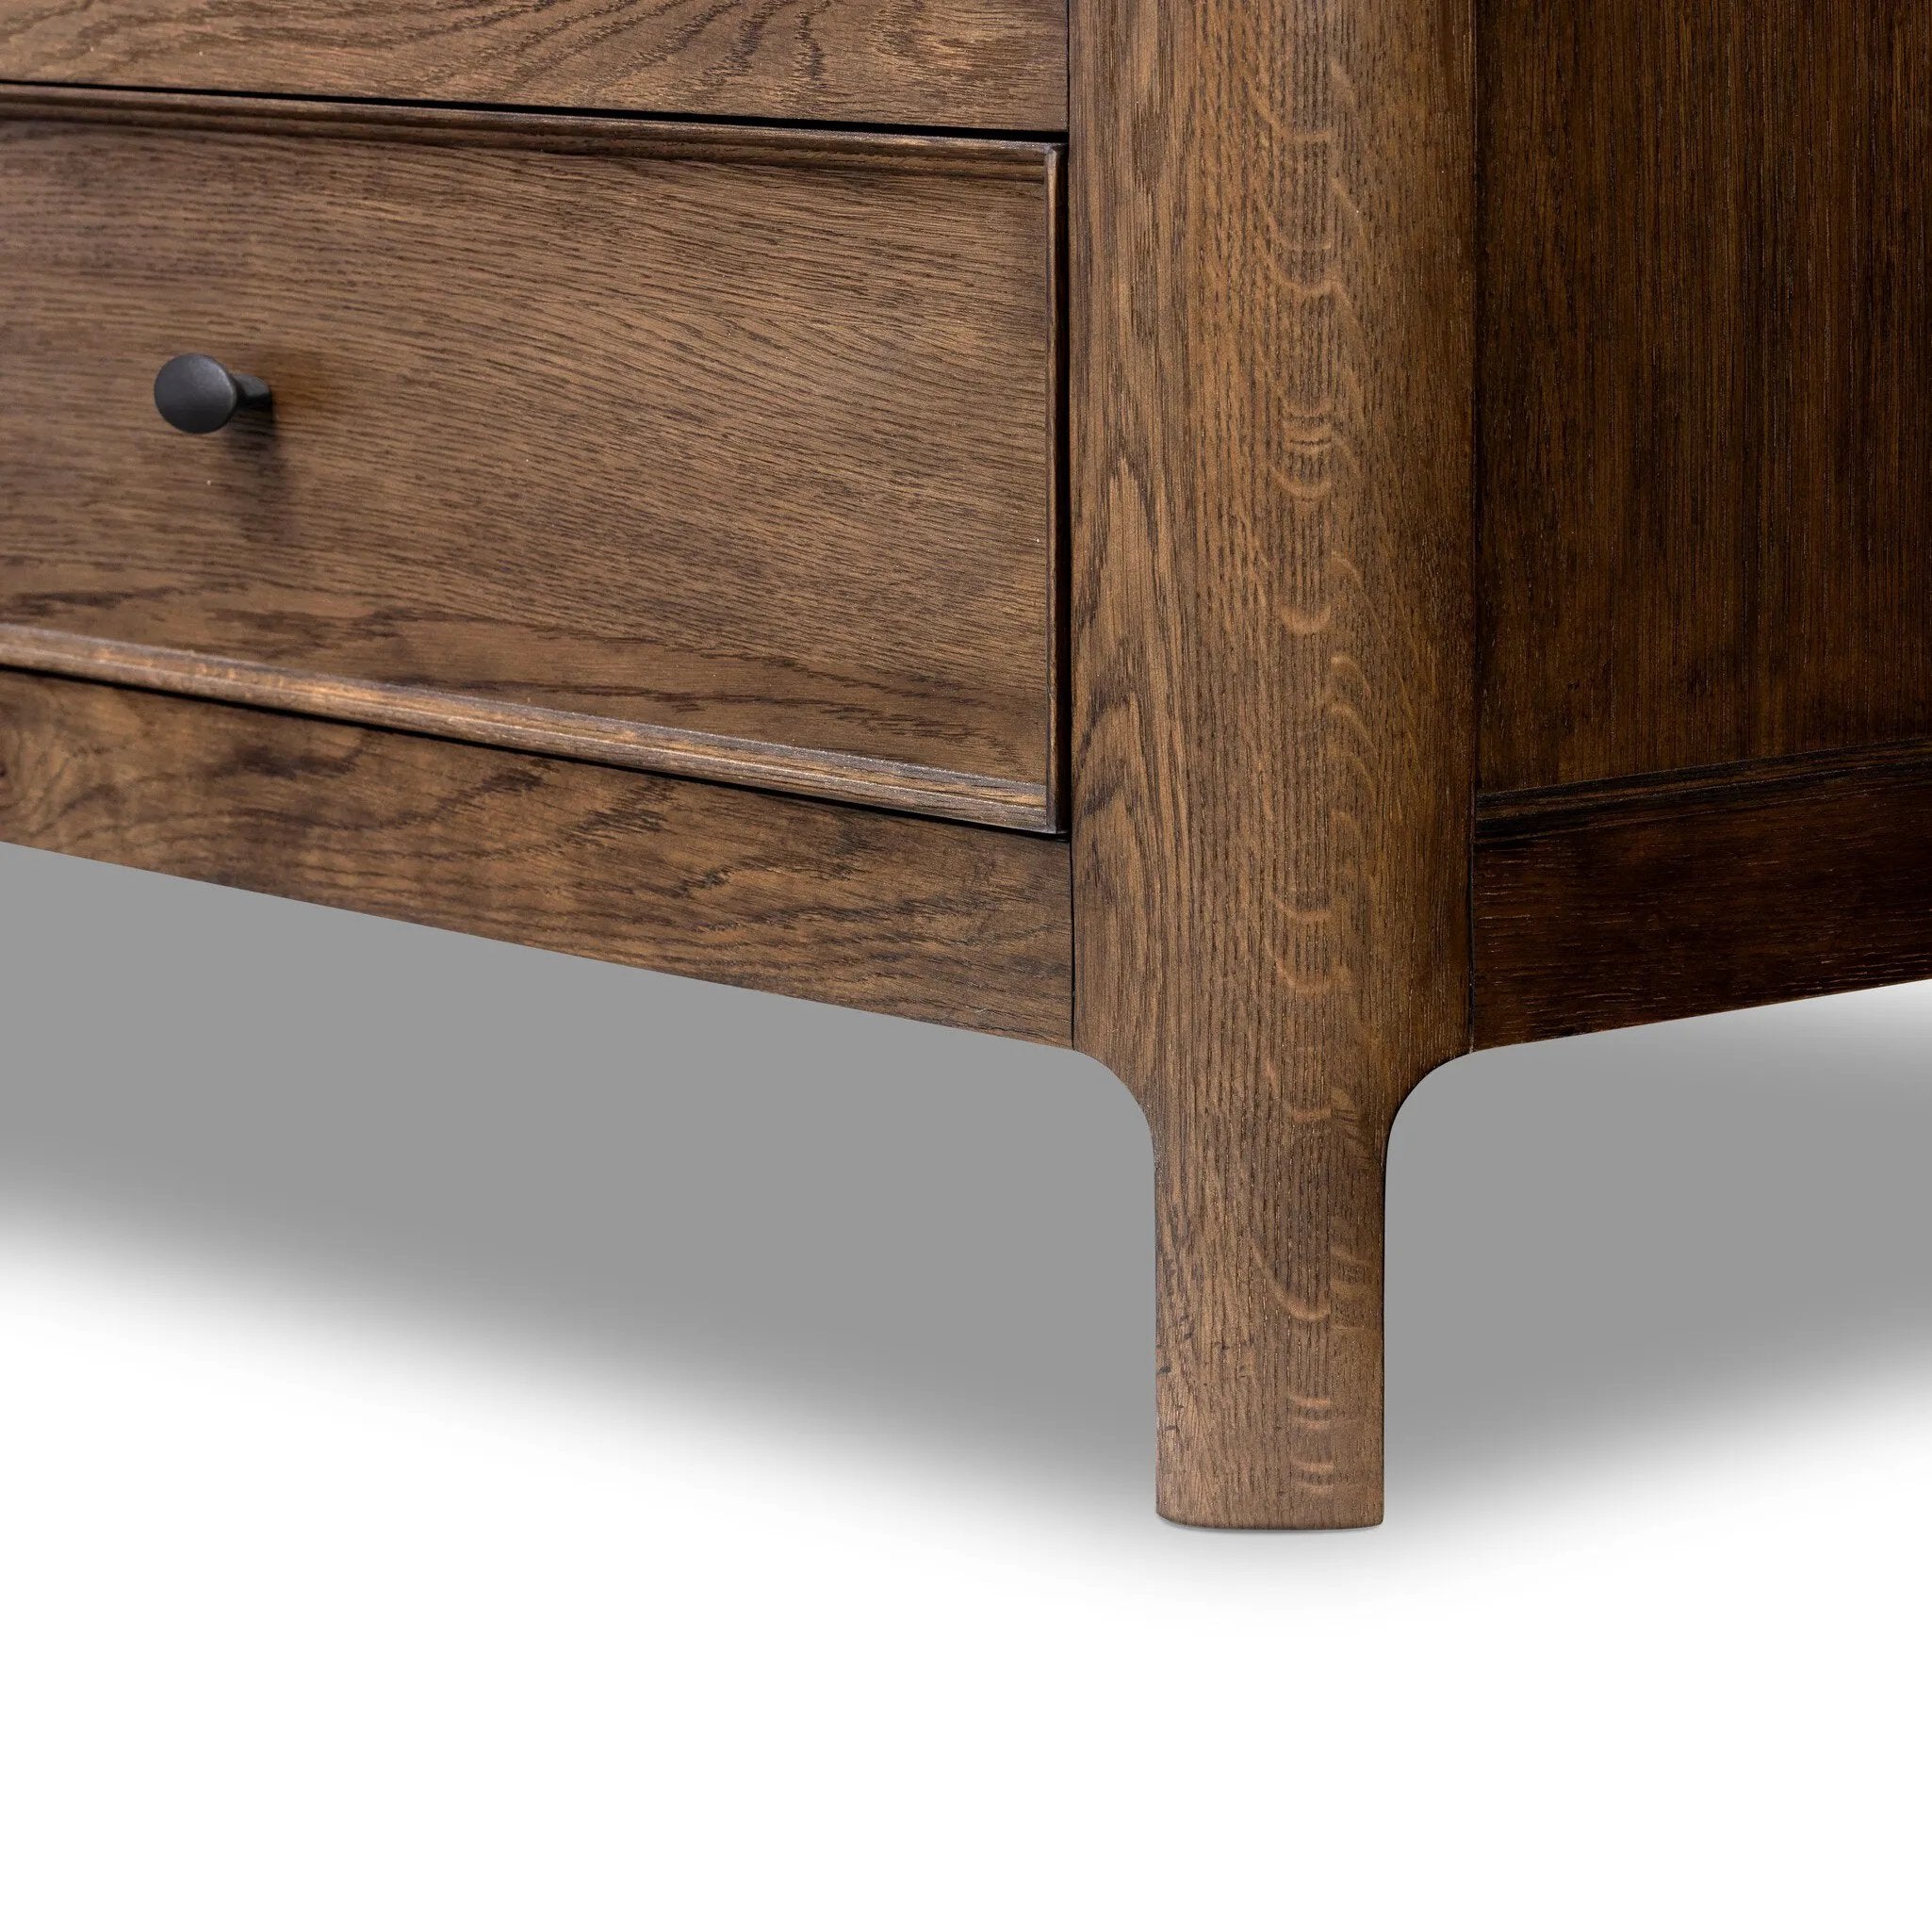 Like an heirloom tallboy with six drawers, this aged oak dresser has room for it all. Detailed with an overhang surface, carved edges top to bottom, angled legs and oval drawer pulls finished in dark gunmetal.Collection: Bolto Amethyst Home provides interior design, new home construction design consulting, vintage area rugs, and lighting in the Des Moines metro area.